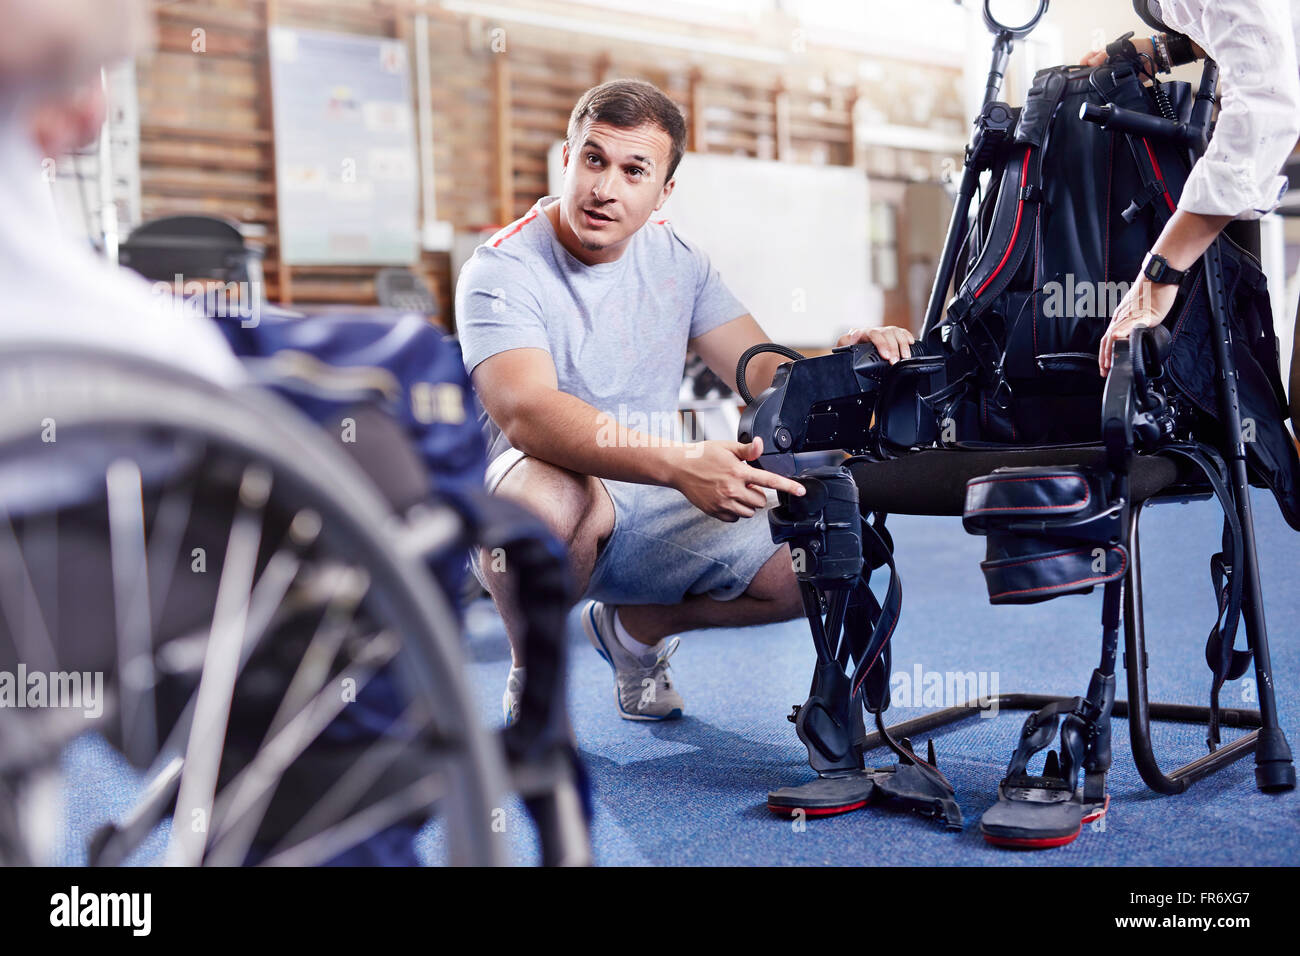 Physical therapist explaining equipment to man in wheelchair Stock Photo